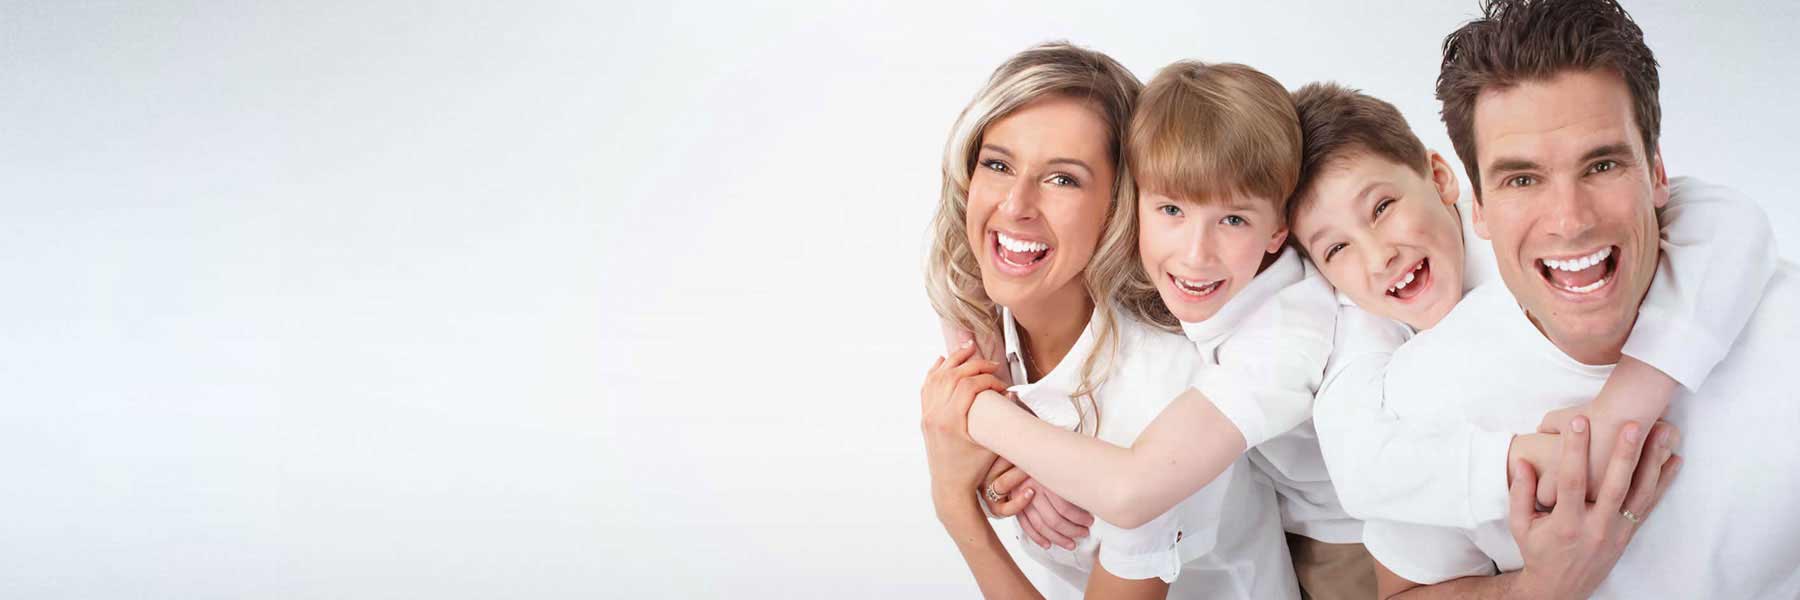 General Dentistry Service in Morpeth - Tooth N Care